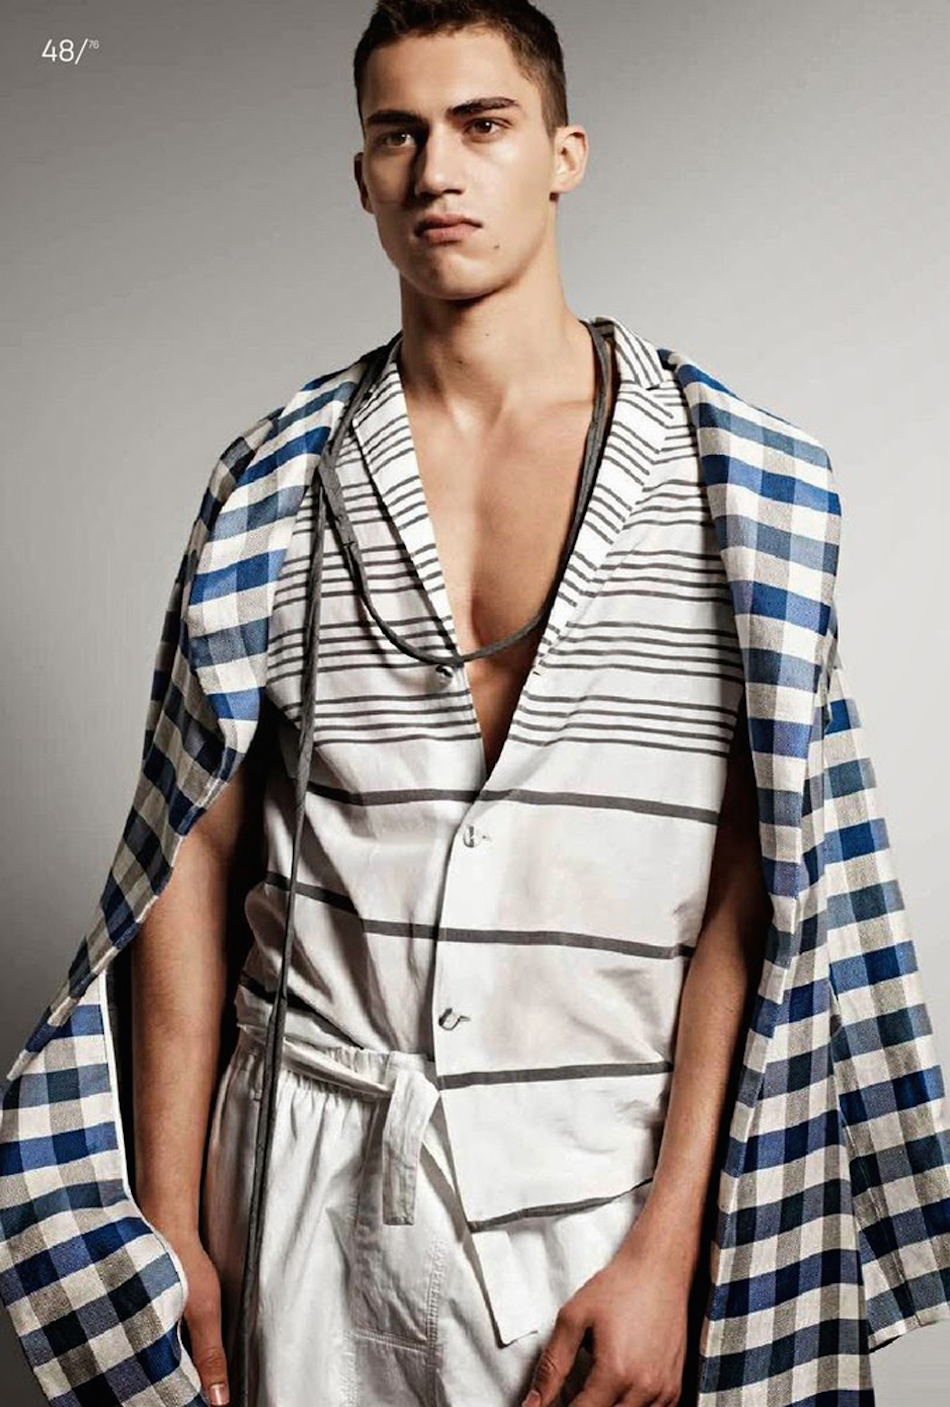 Alessio Pozzi Models Relaxed Menswear Styles for Urban Cover Shoot